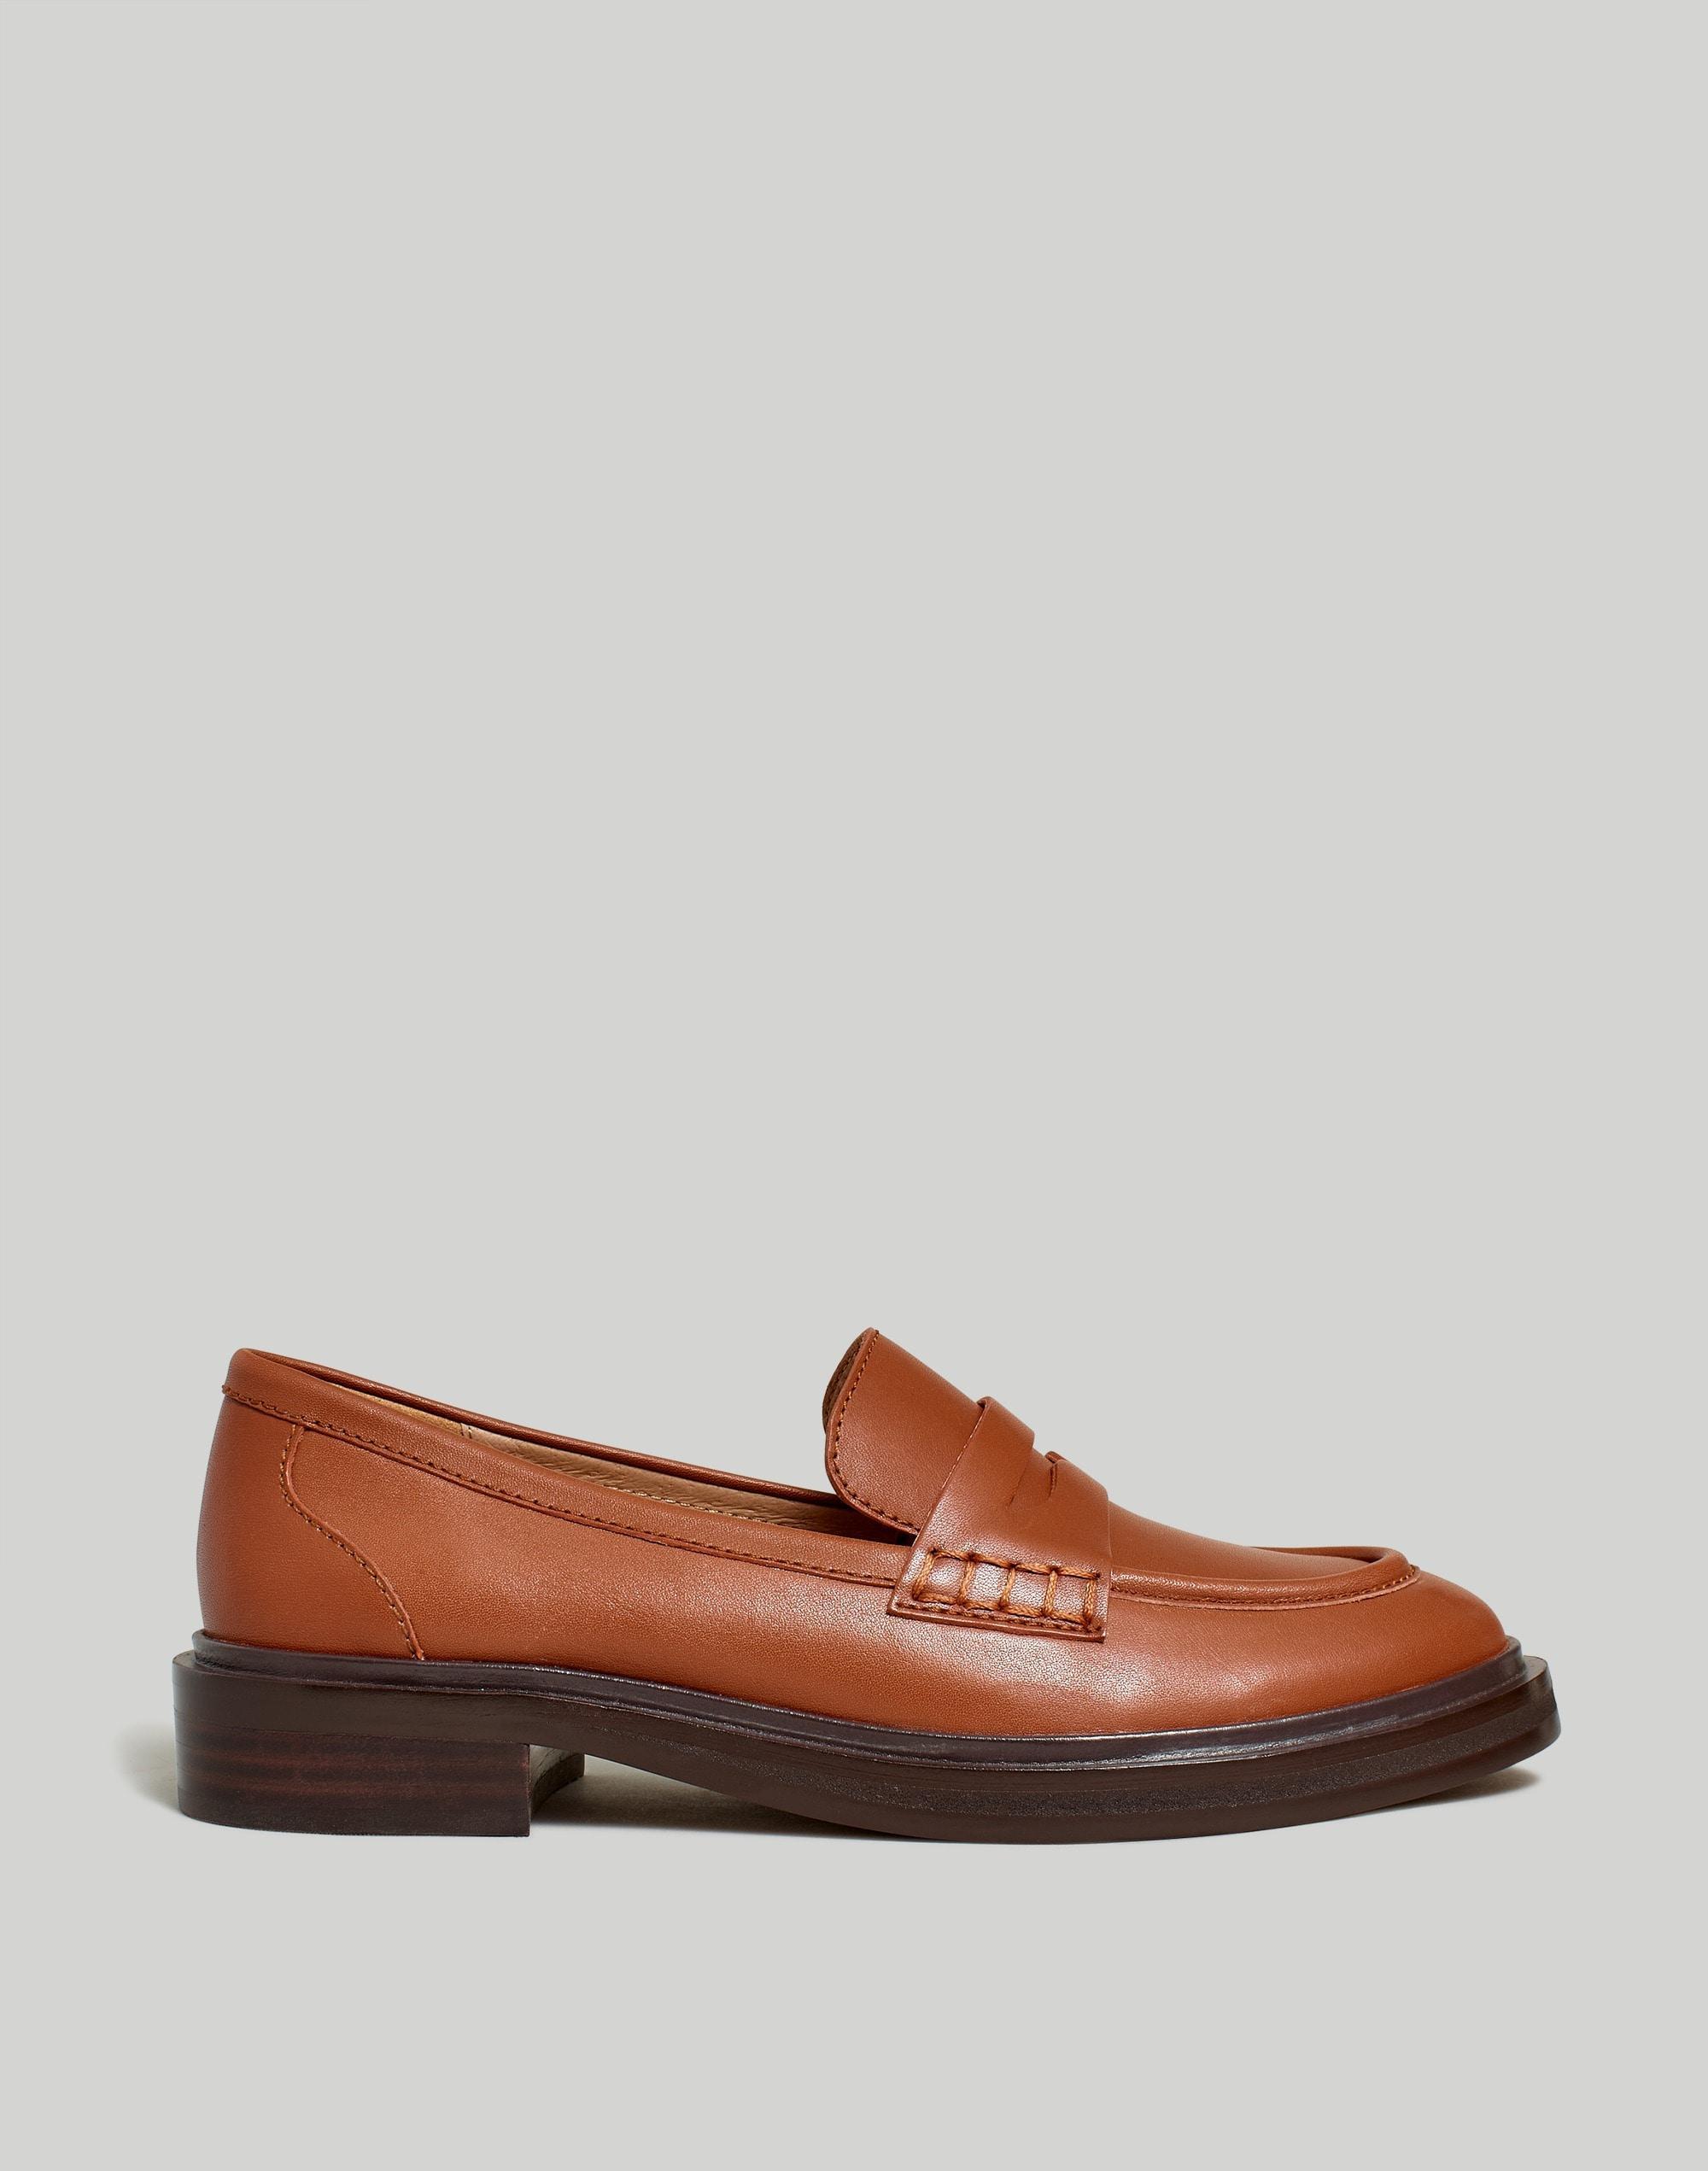 The Vernon Loafer in Leather Product Image